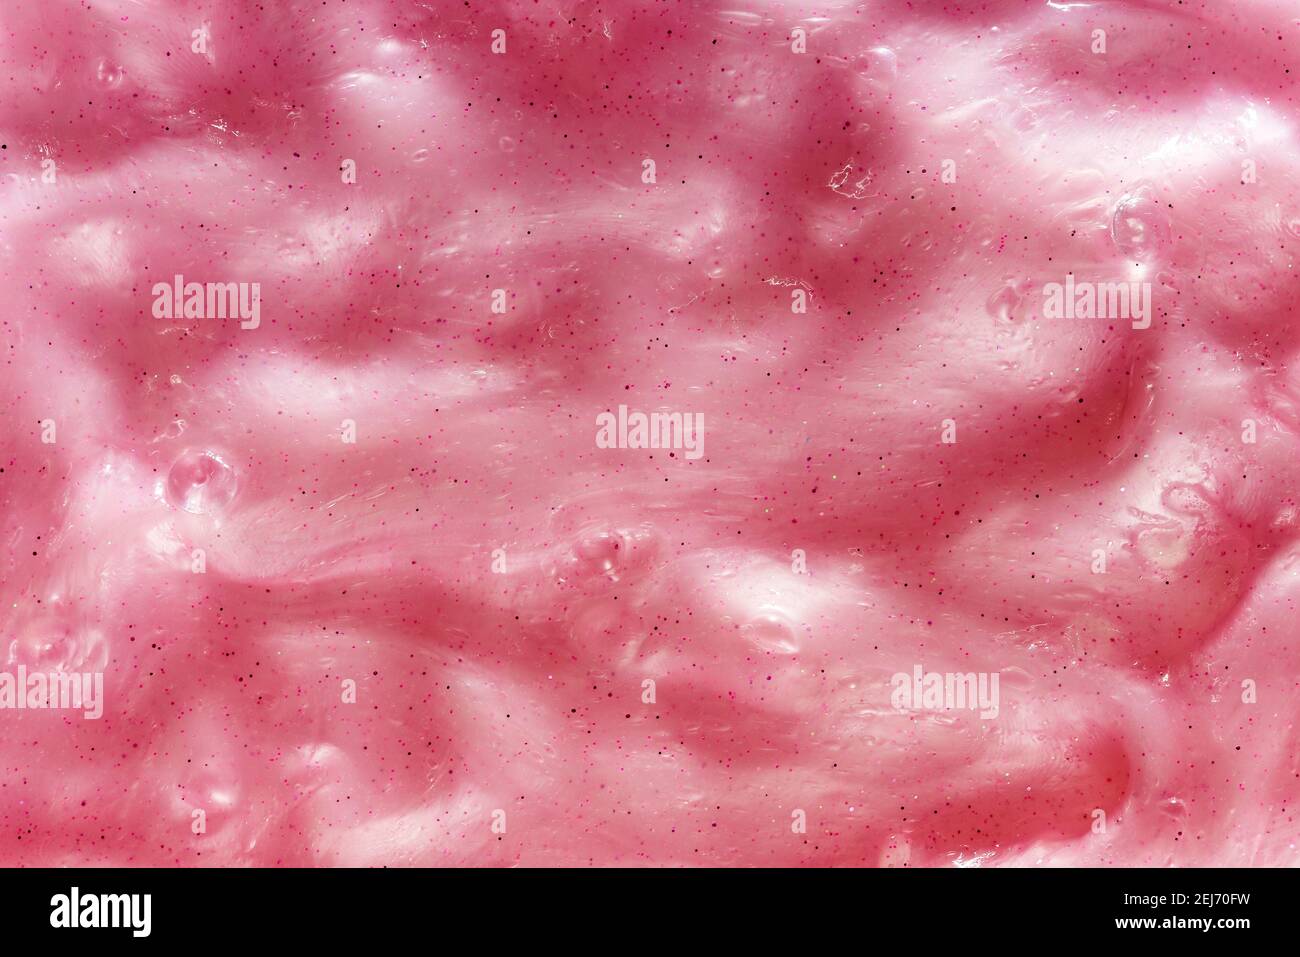 Full frame background of gooey pink slime, a kids toy produced with guar gum with an amorphous malleable squishy slimy texture in close up detail Stock Photo